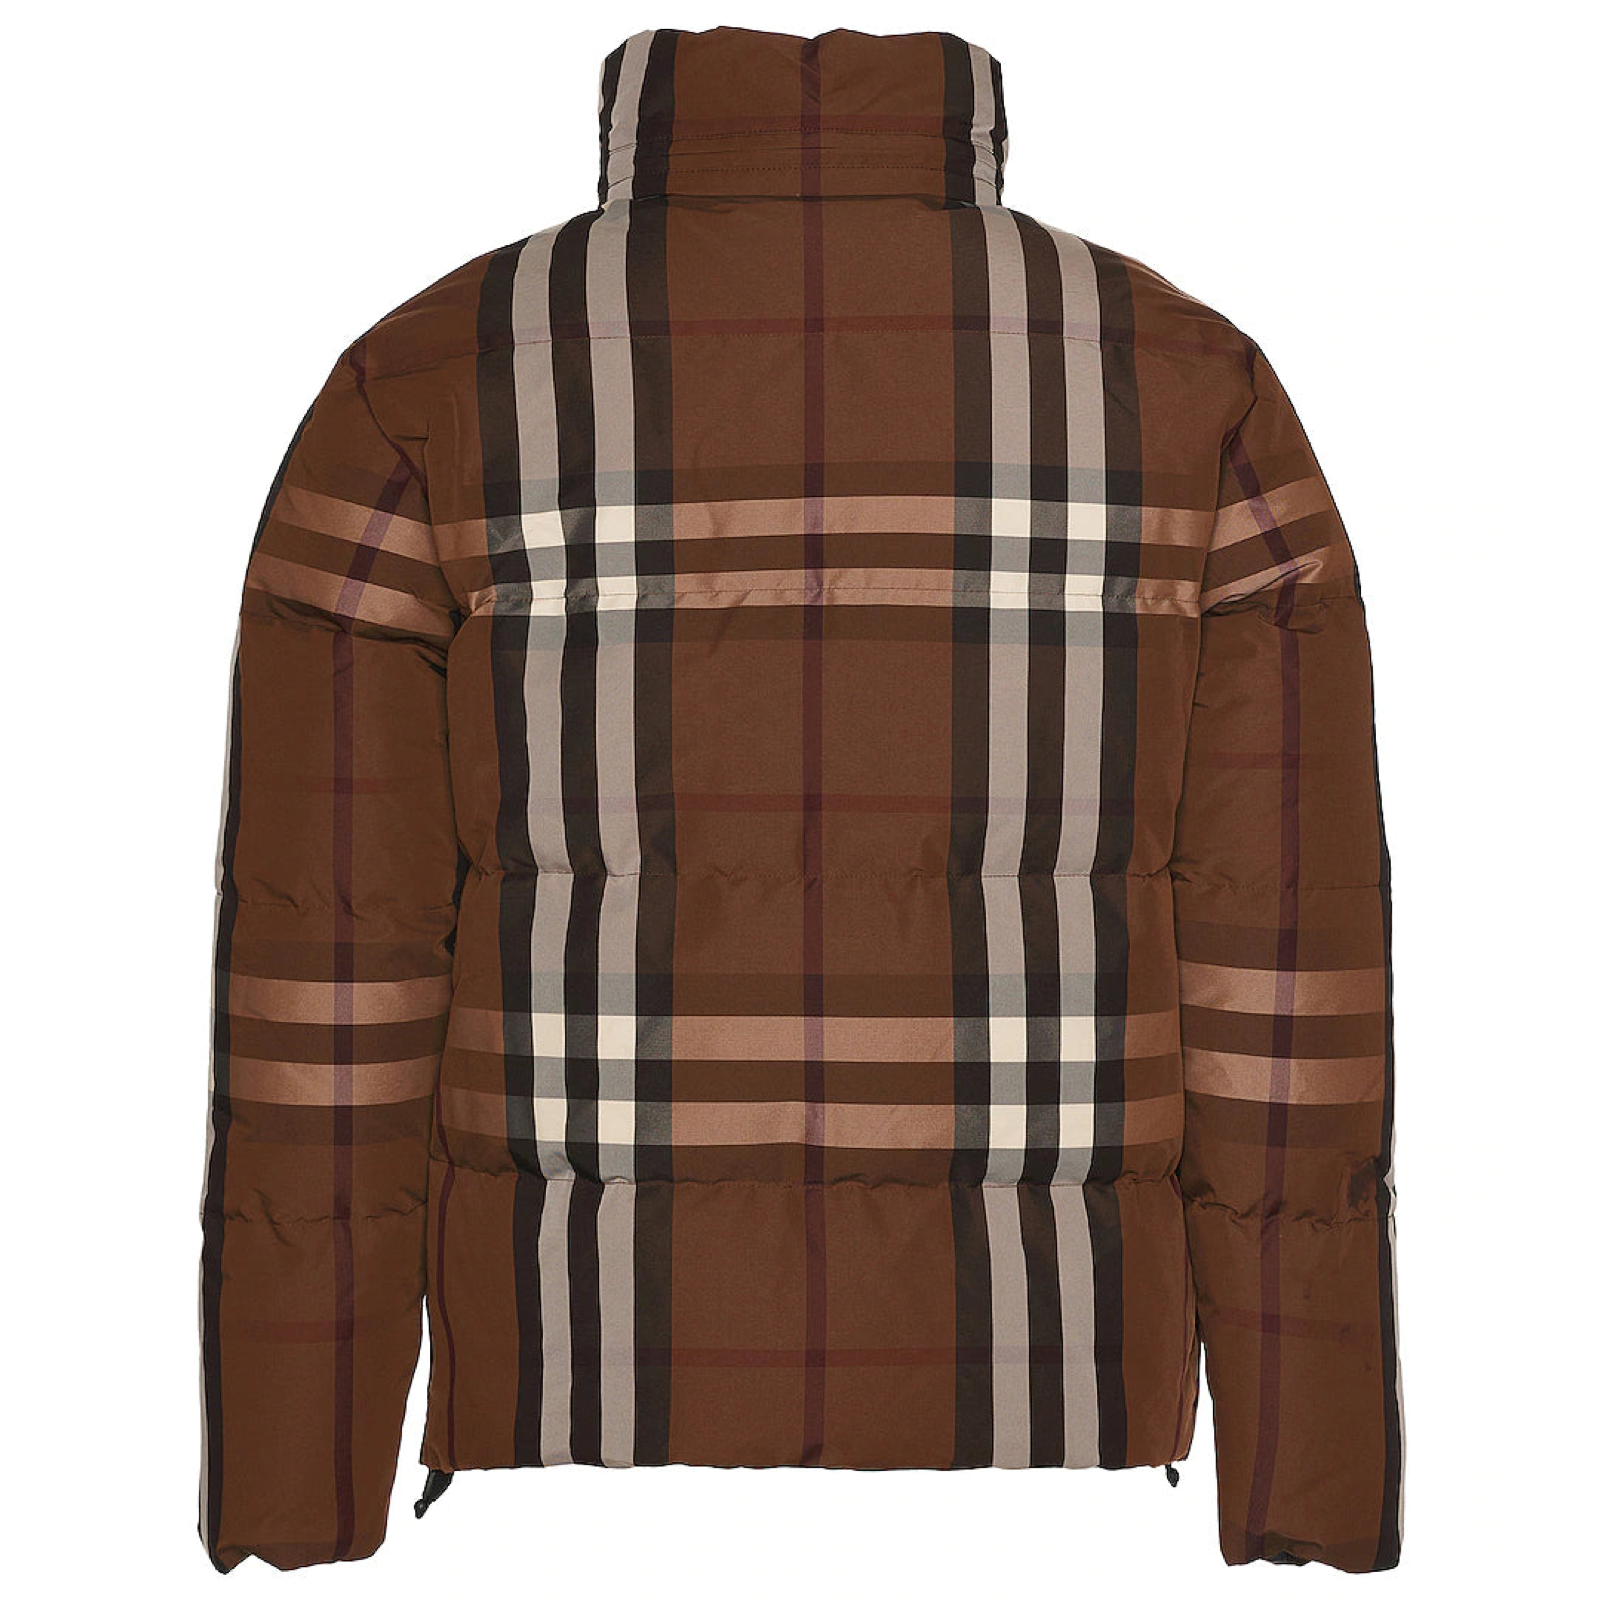 Burberry Rigby Check Reversible Jacket - DANYOUNGUK